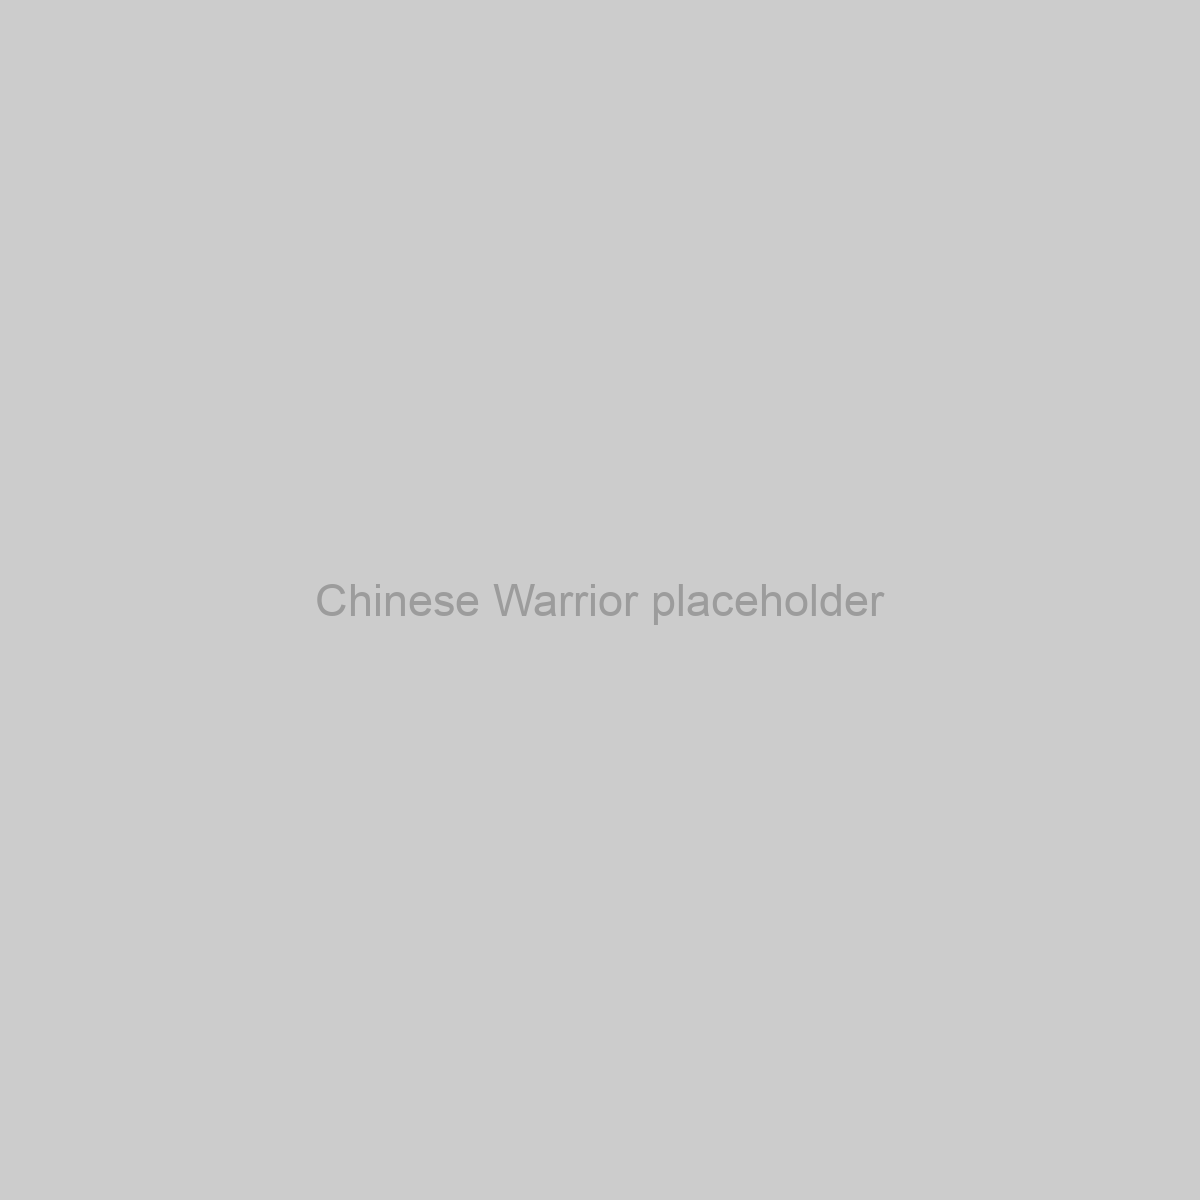 Chinese Warrior Placeholder Image